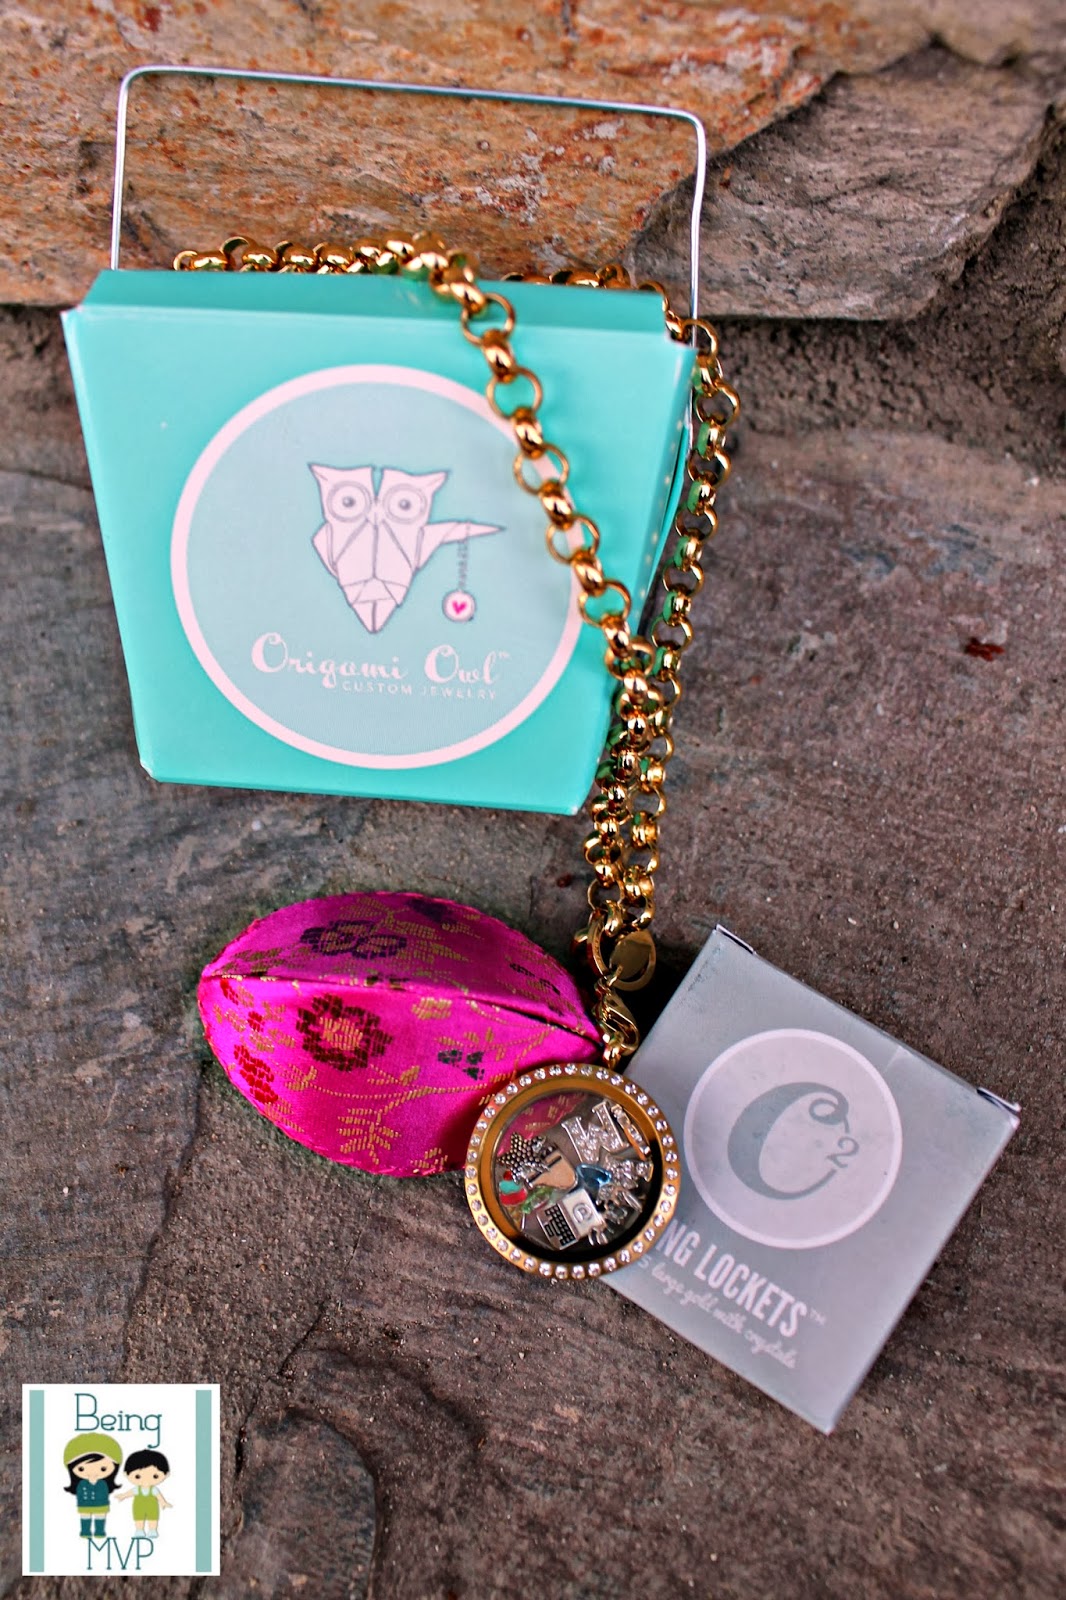 Being Mvp Christmas Wishes Blog Hop Origami Owl Giveaway